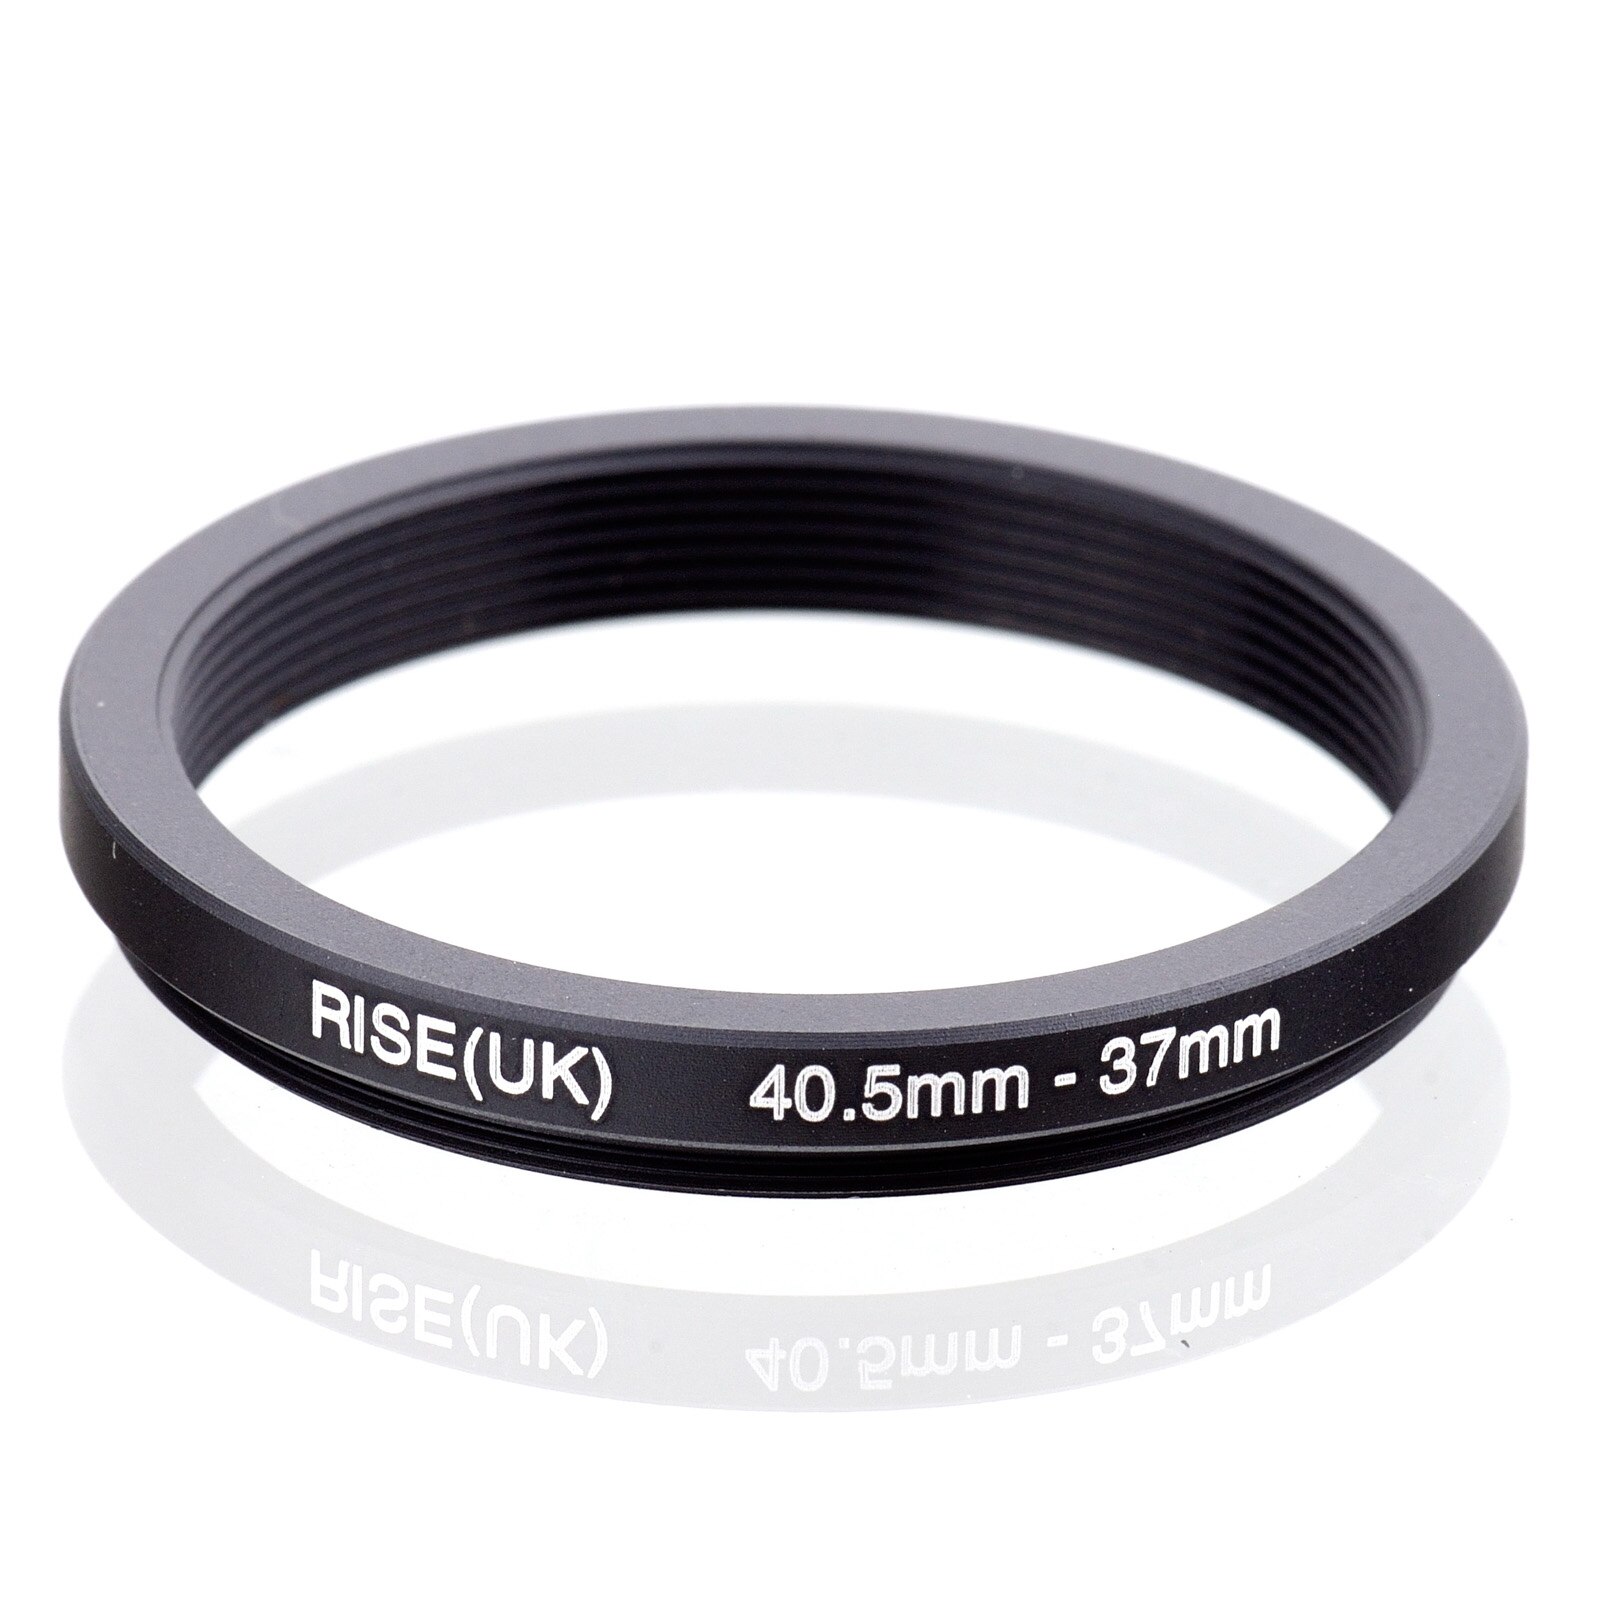 Rise (Uk) 40.5Mm-37Mm 40.5-37 Mm 40.5-37 Step Down Filter Adapter Ring